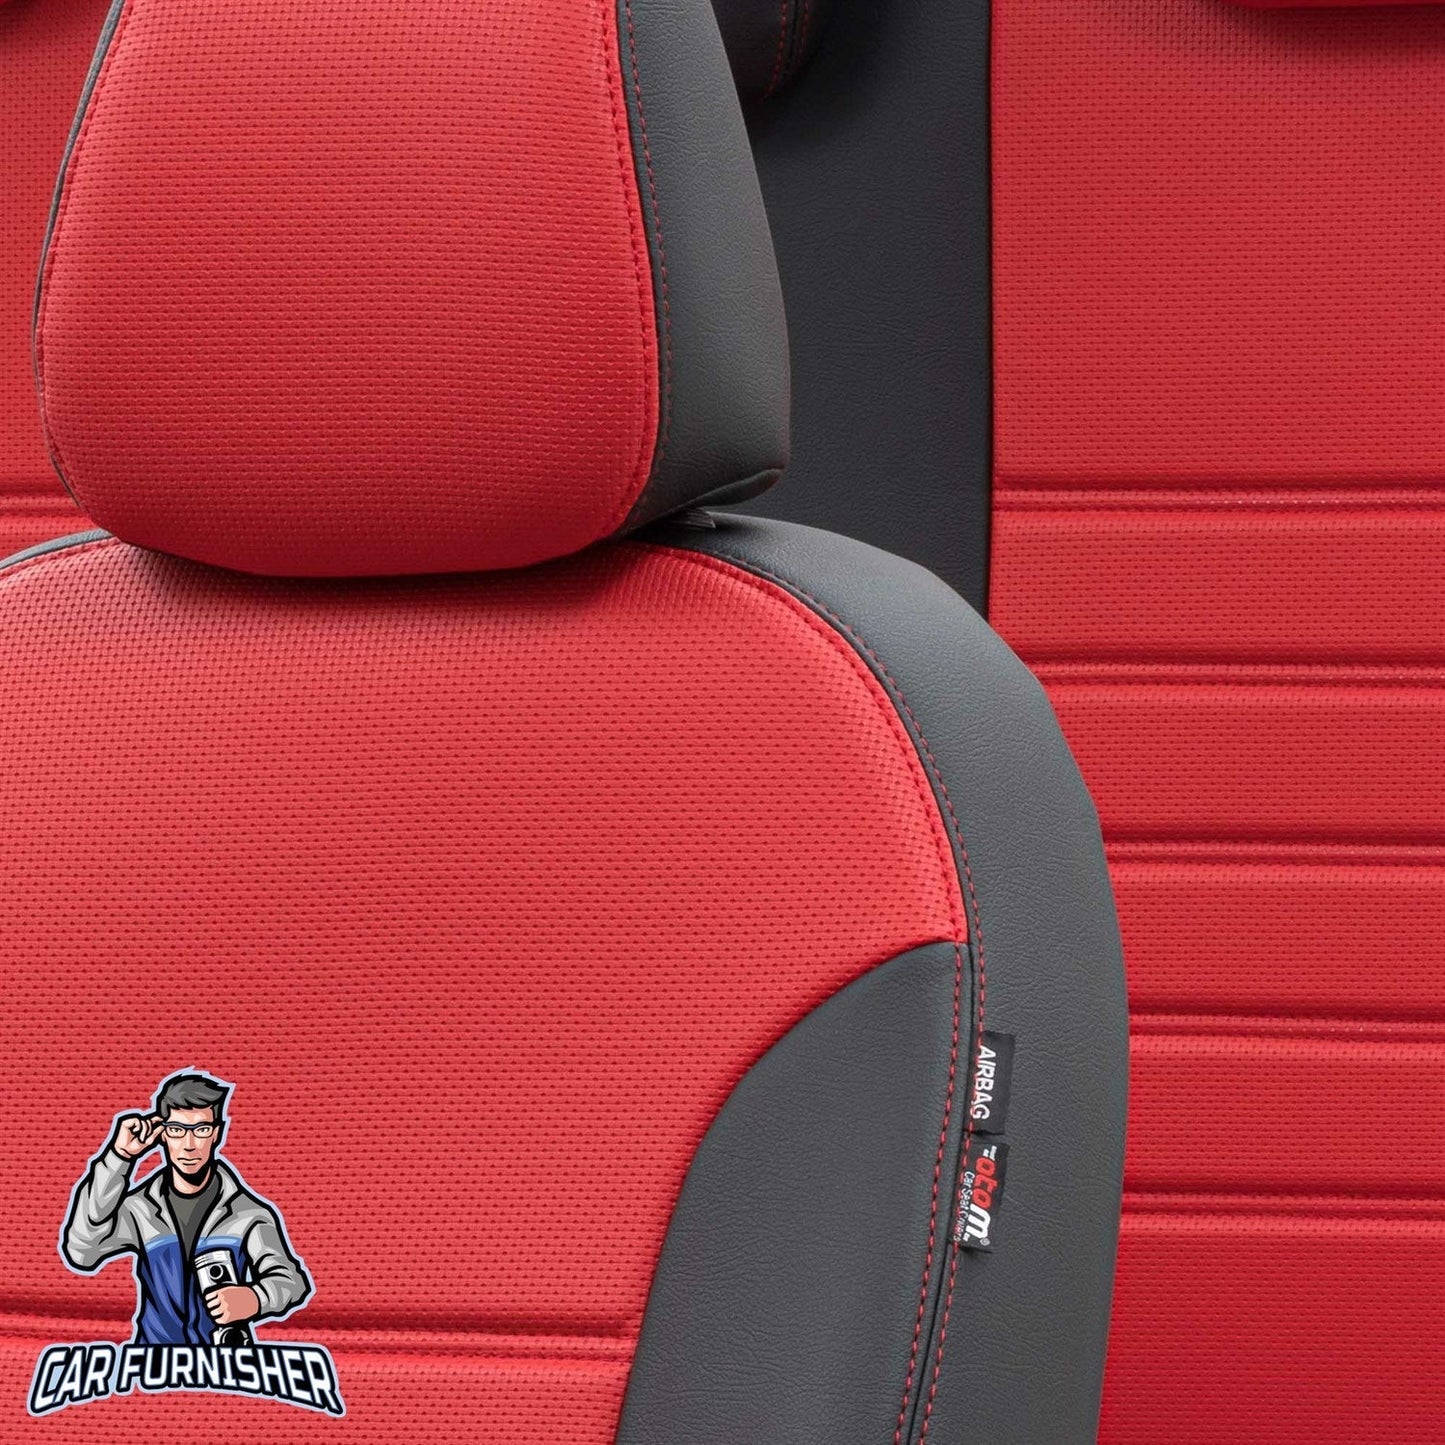 Volvo FH Seat Cover New York Leather Design Red Leather